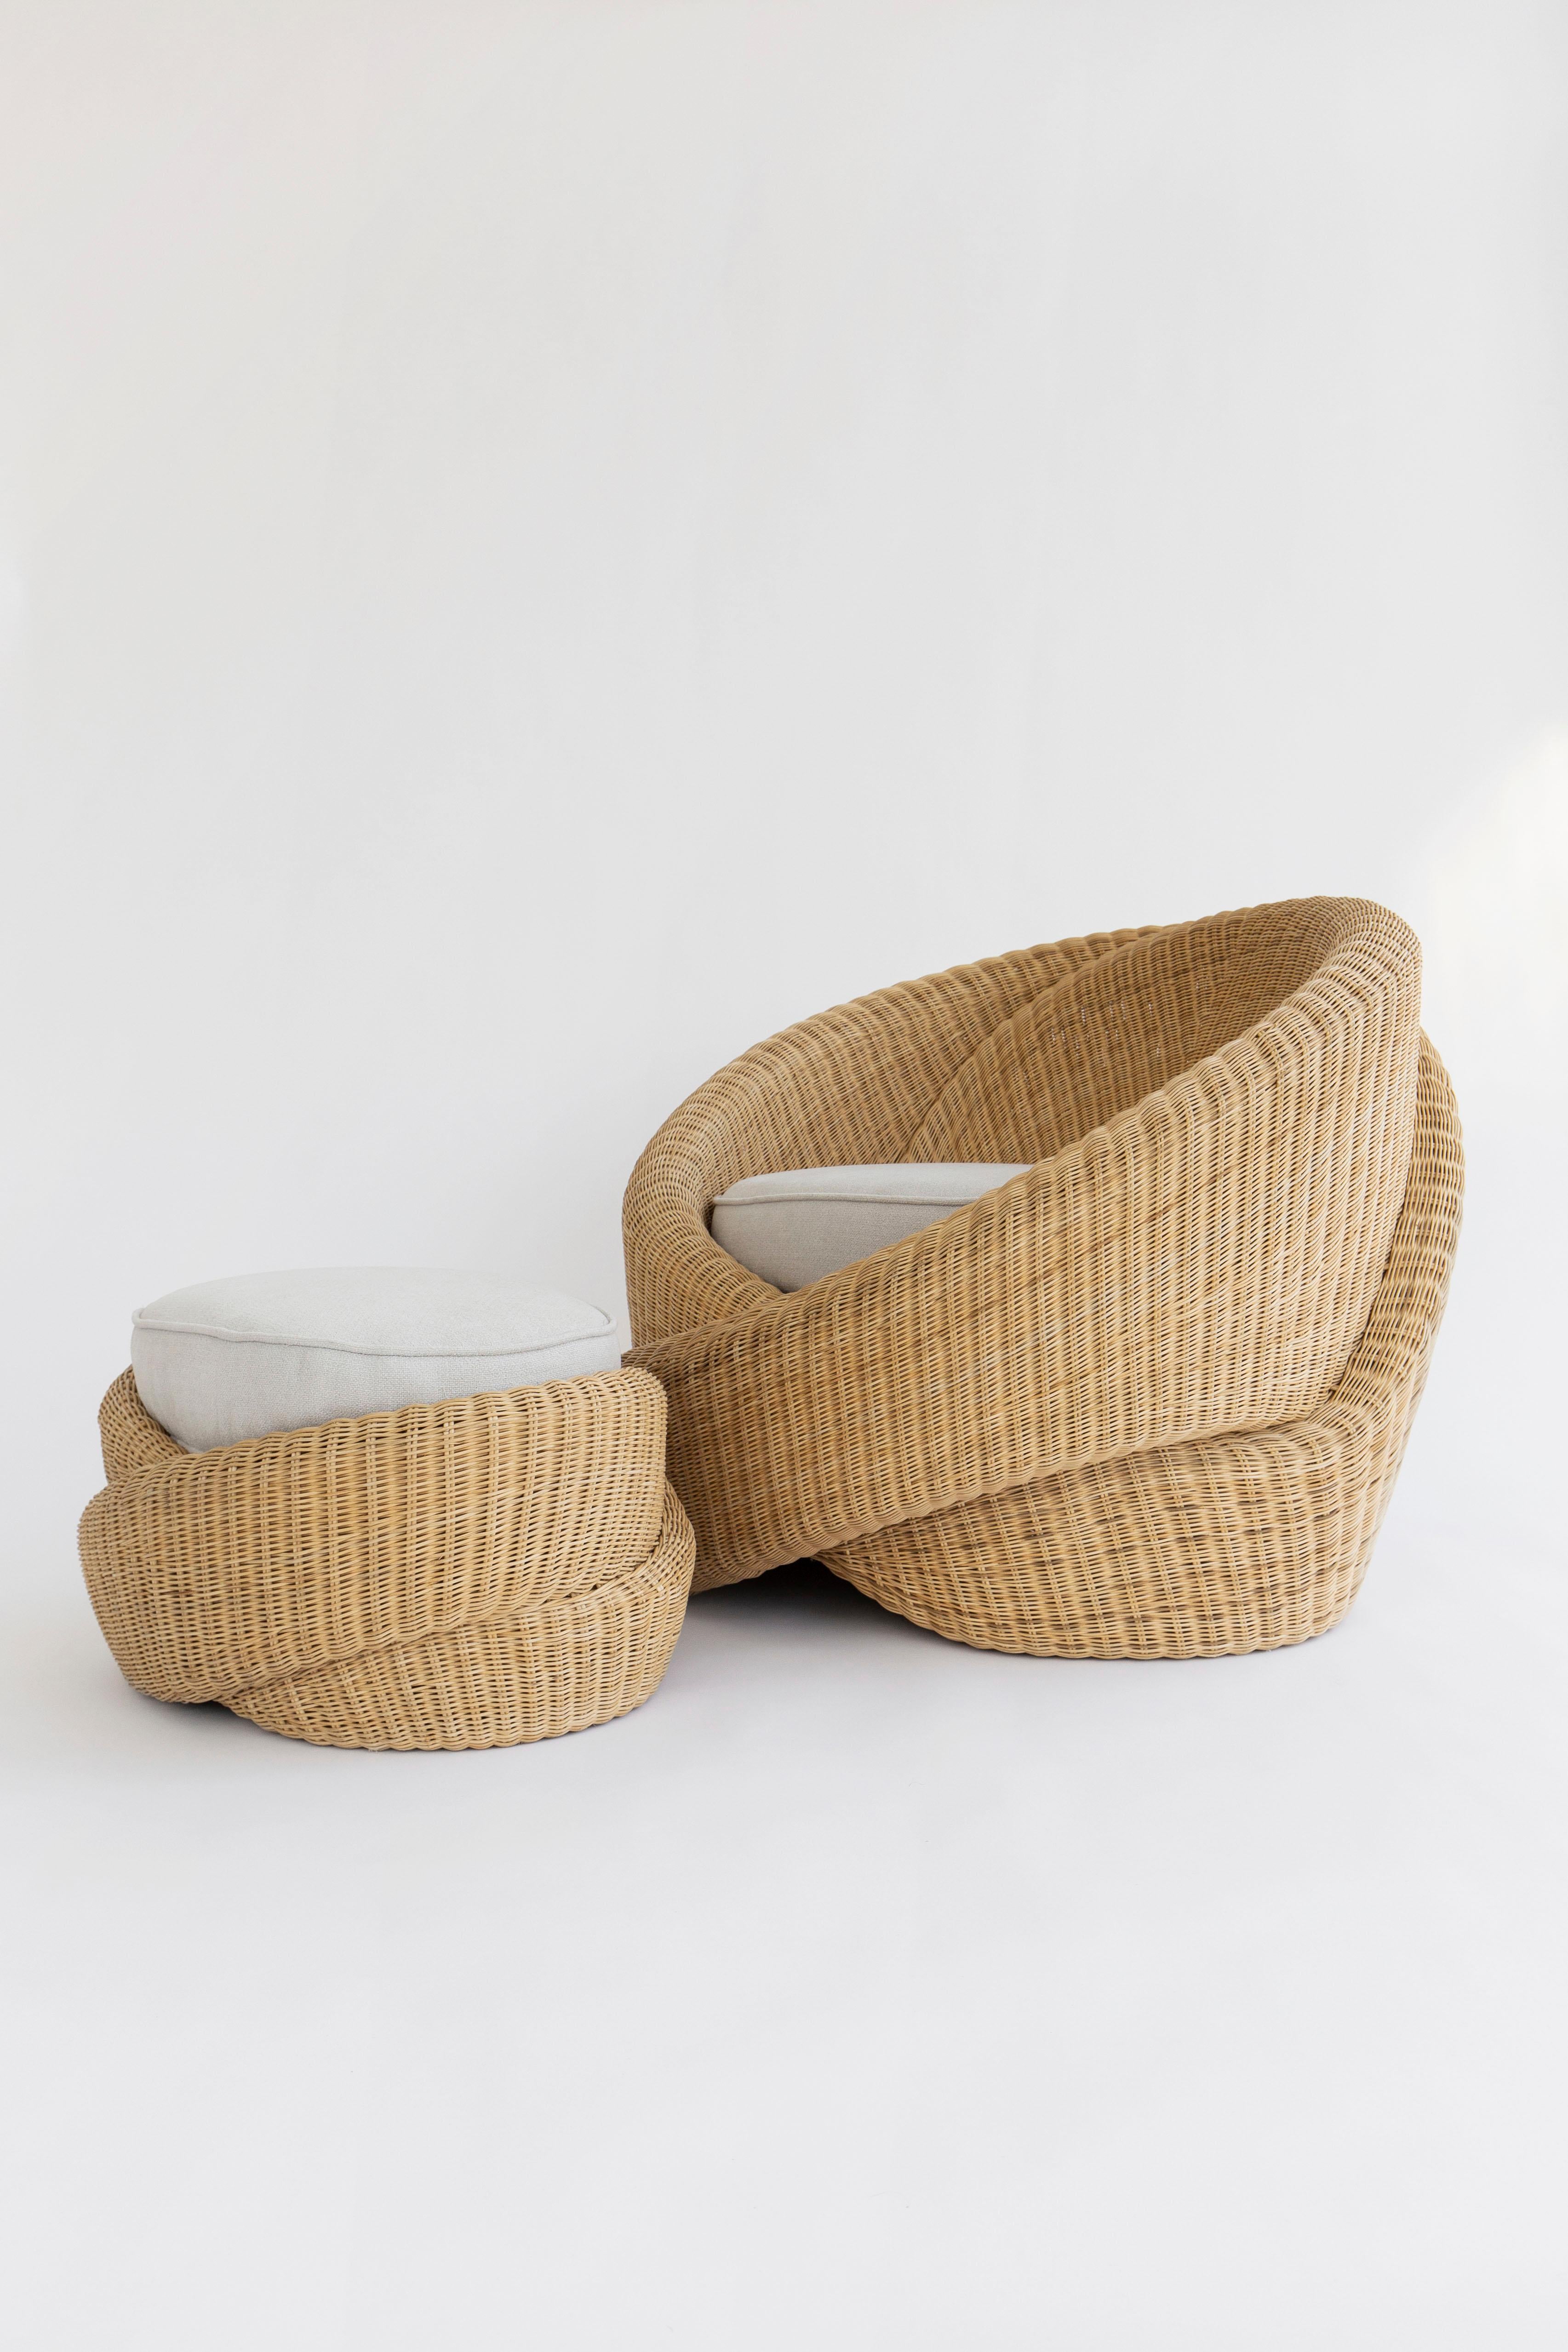 American Looped Contemporary Rattan Indoor-Outdoor Armchair, Cushions in Sunbrella Fabric For Sale